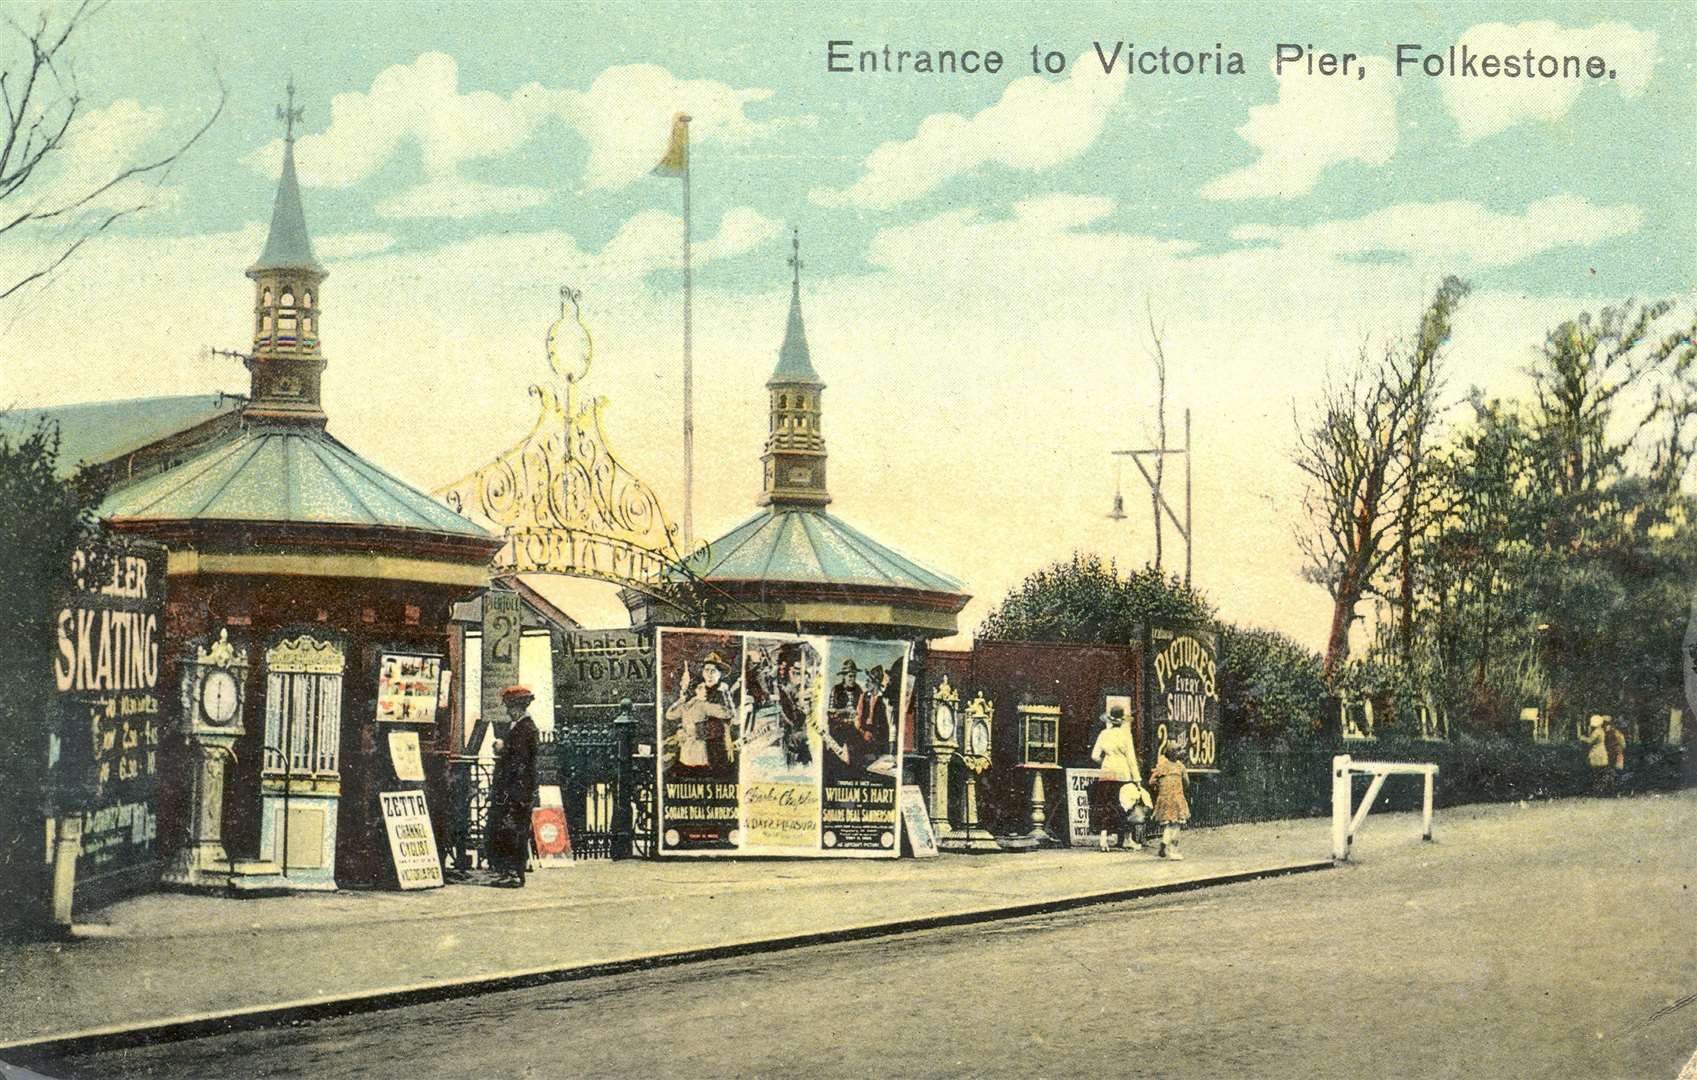 An old postcard showing the octagonal ticket booths of the Victoria Pier in Folkestone